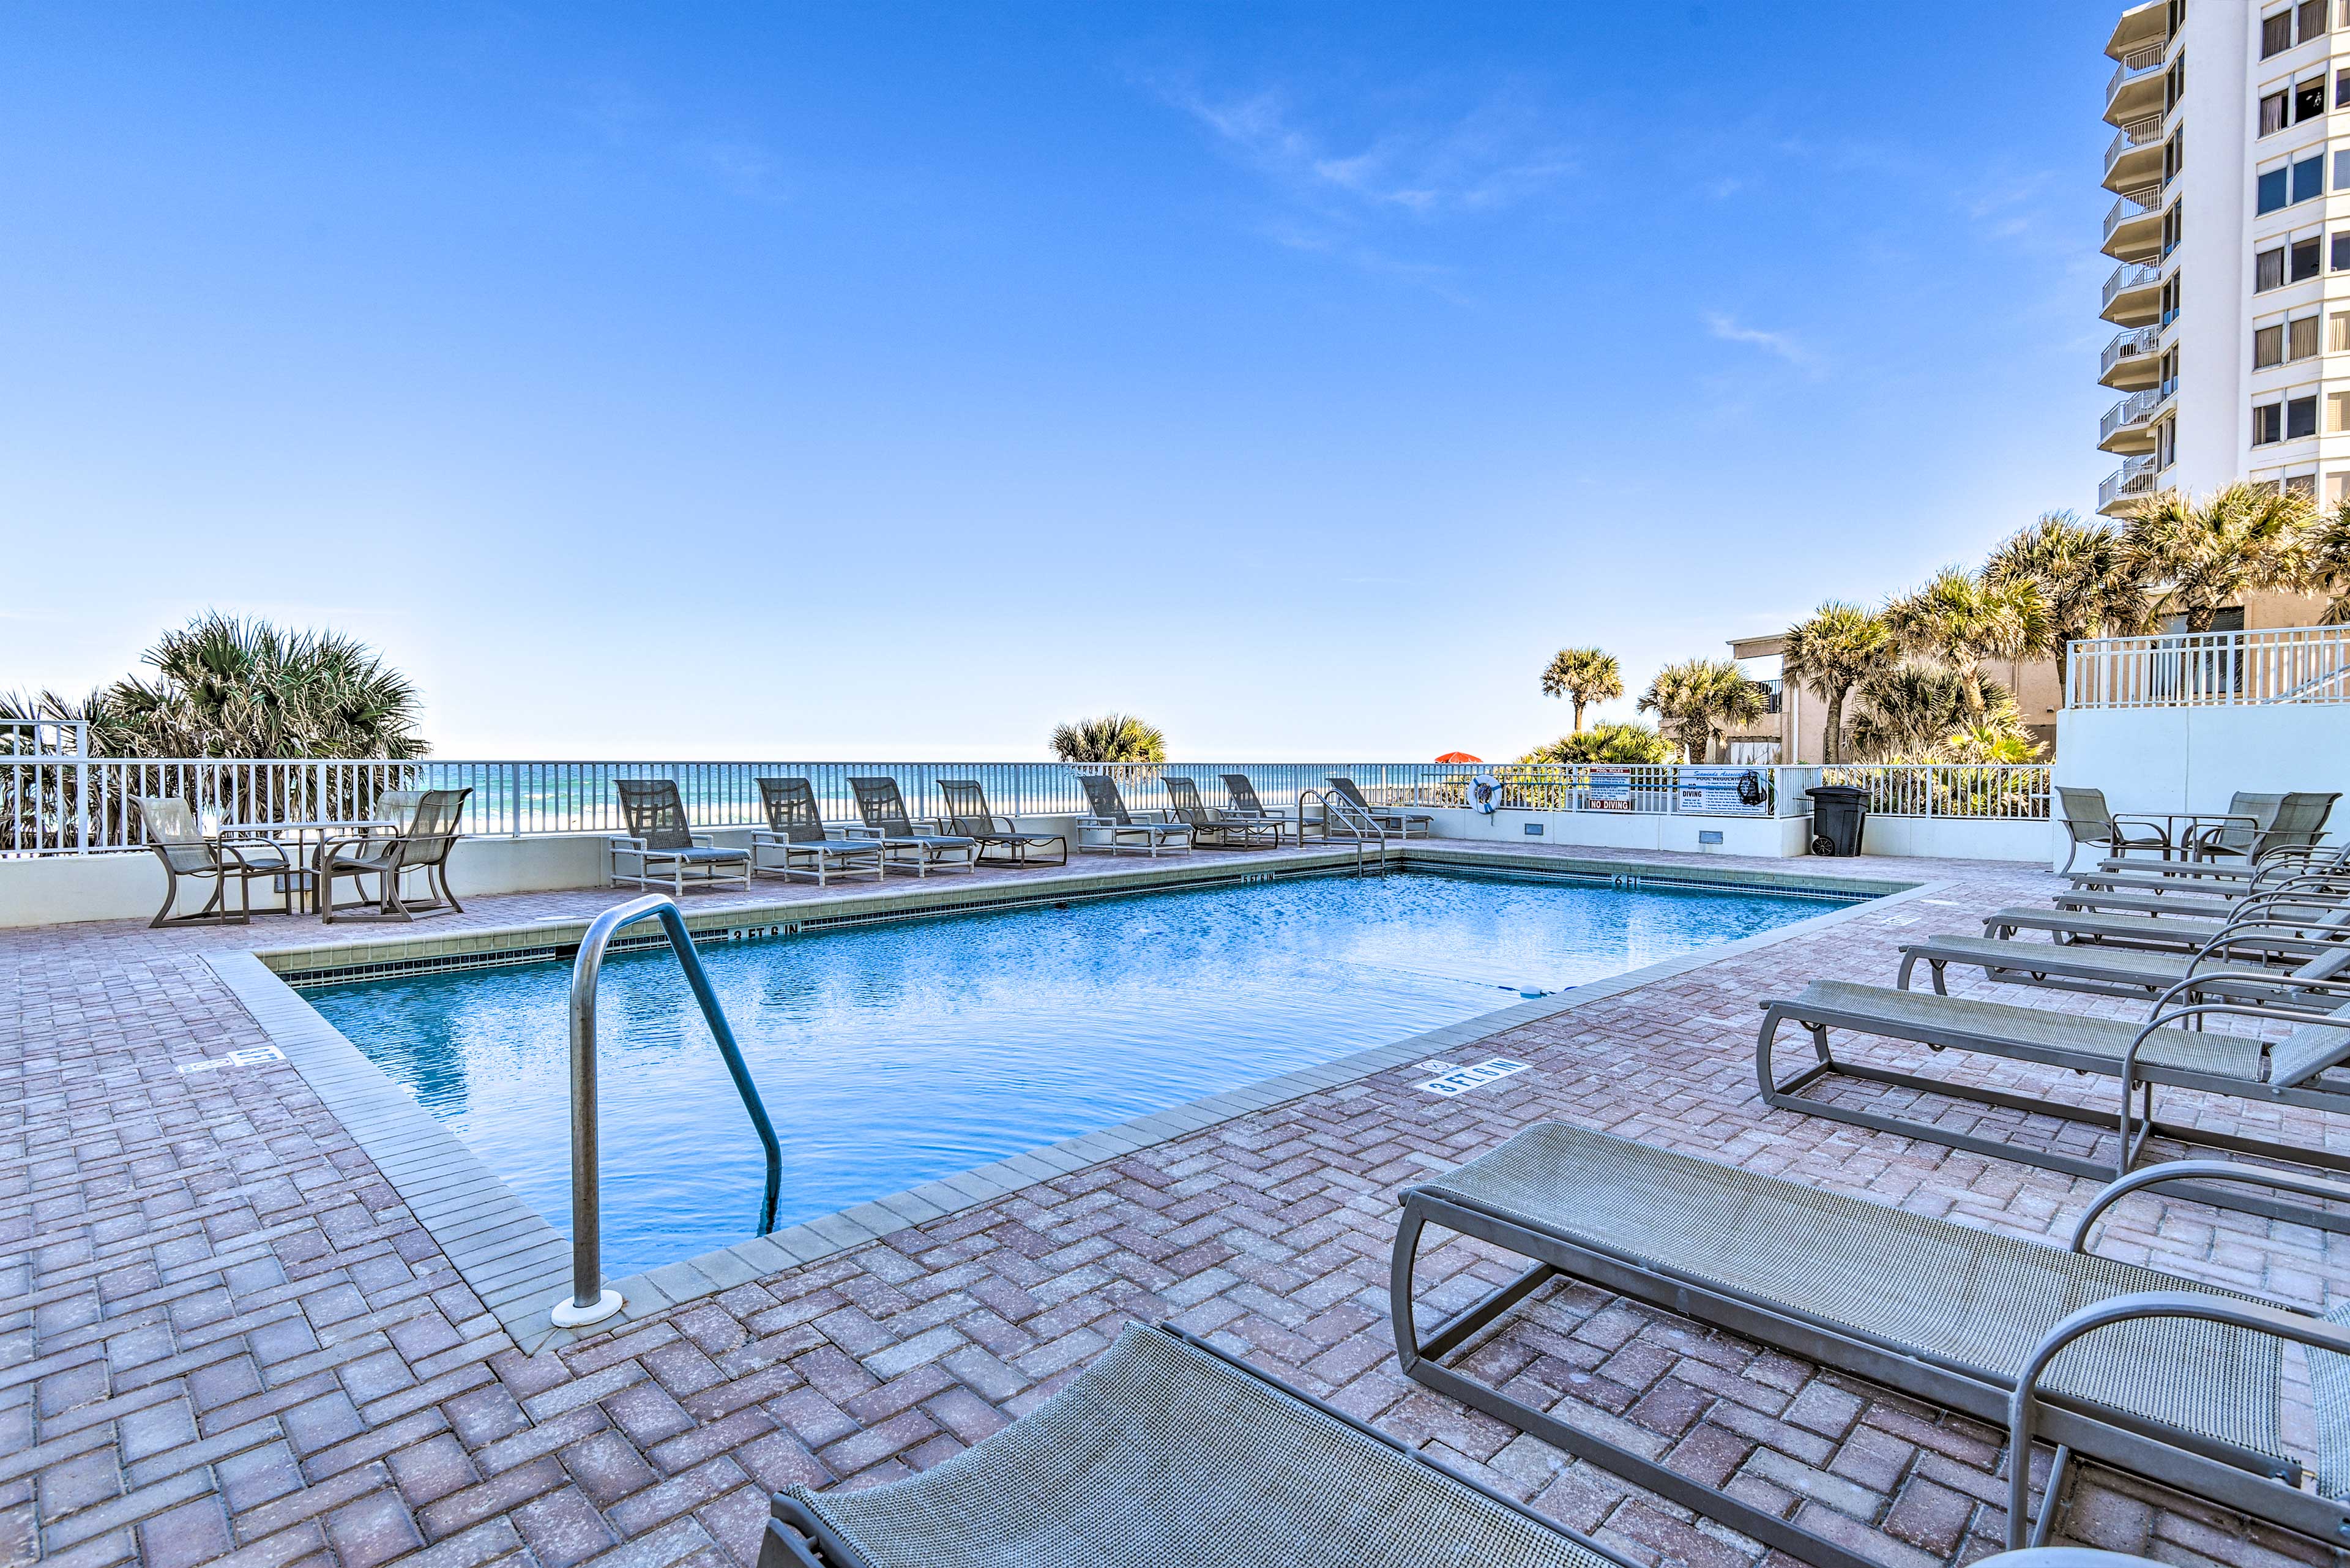 Property Image 2 - Luxe Oceanfront Condo w/Pool: Beach Access + Gear!